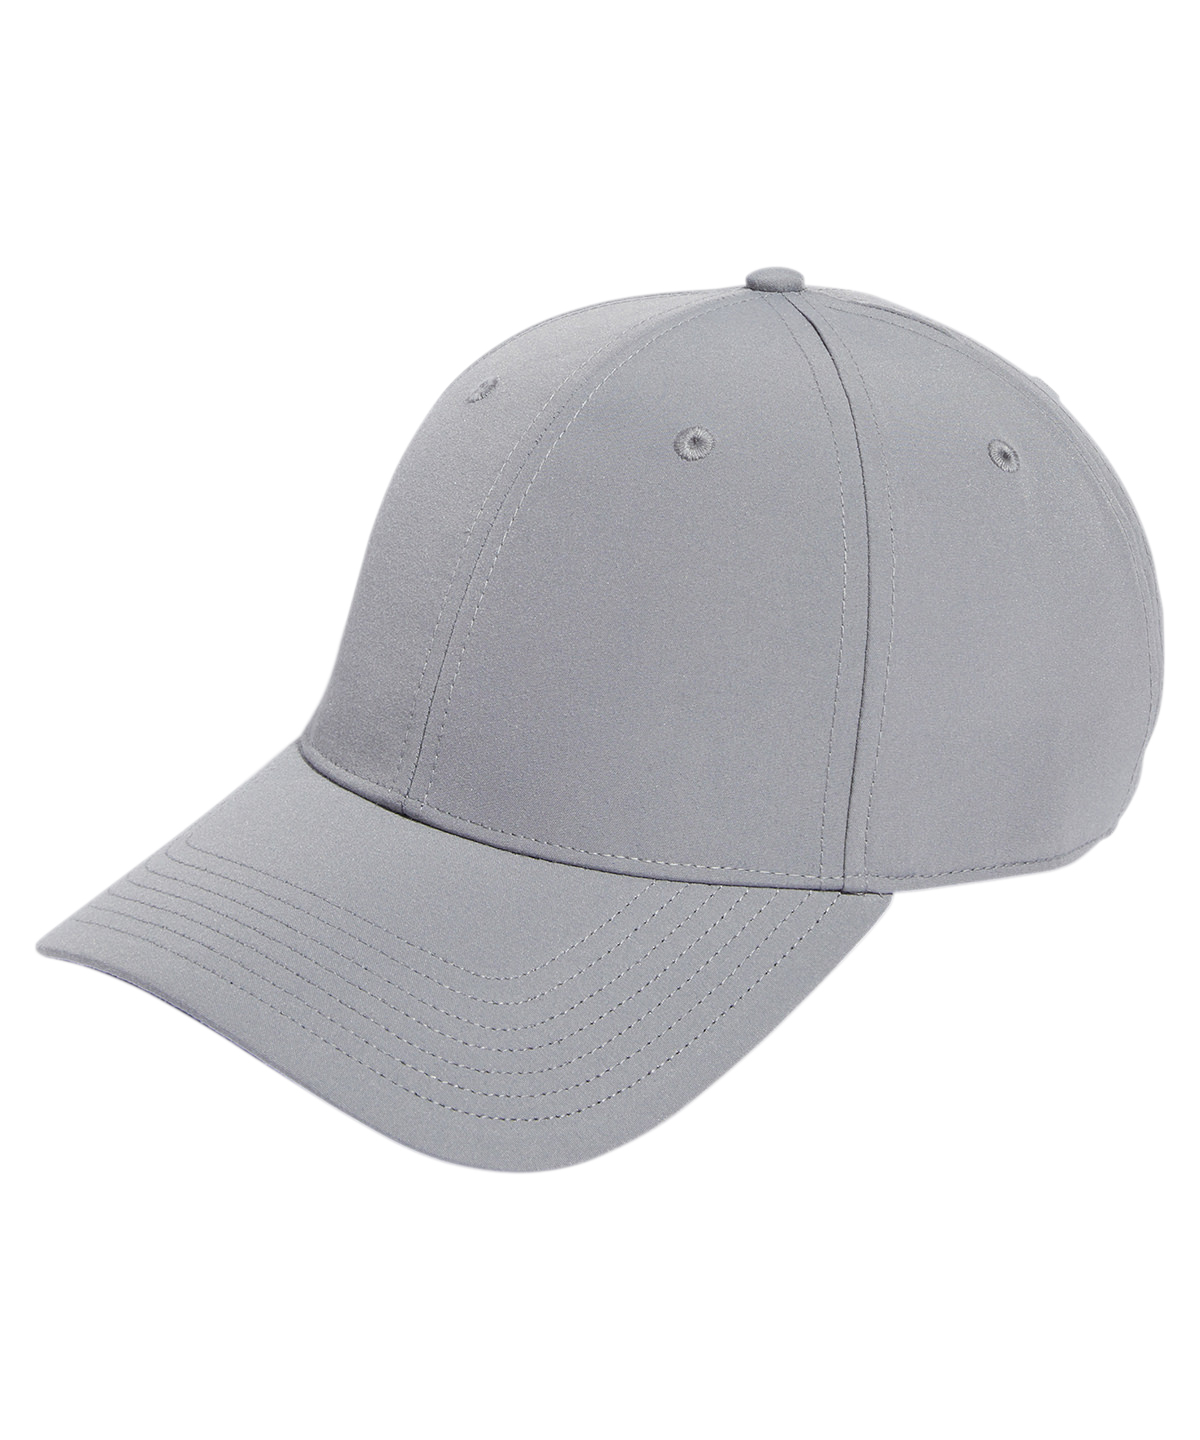 Adidas Golf Performance Crestable Cap Grey Size One Size